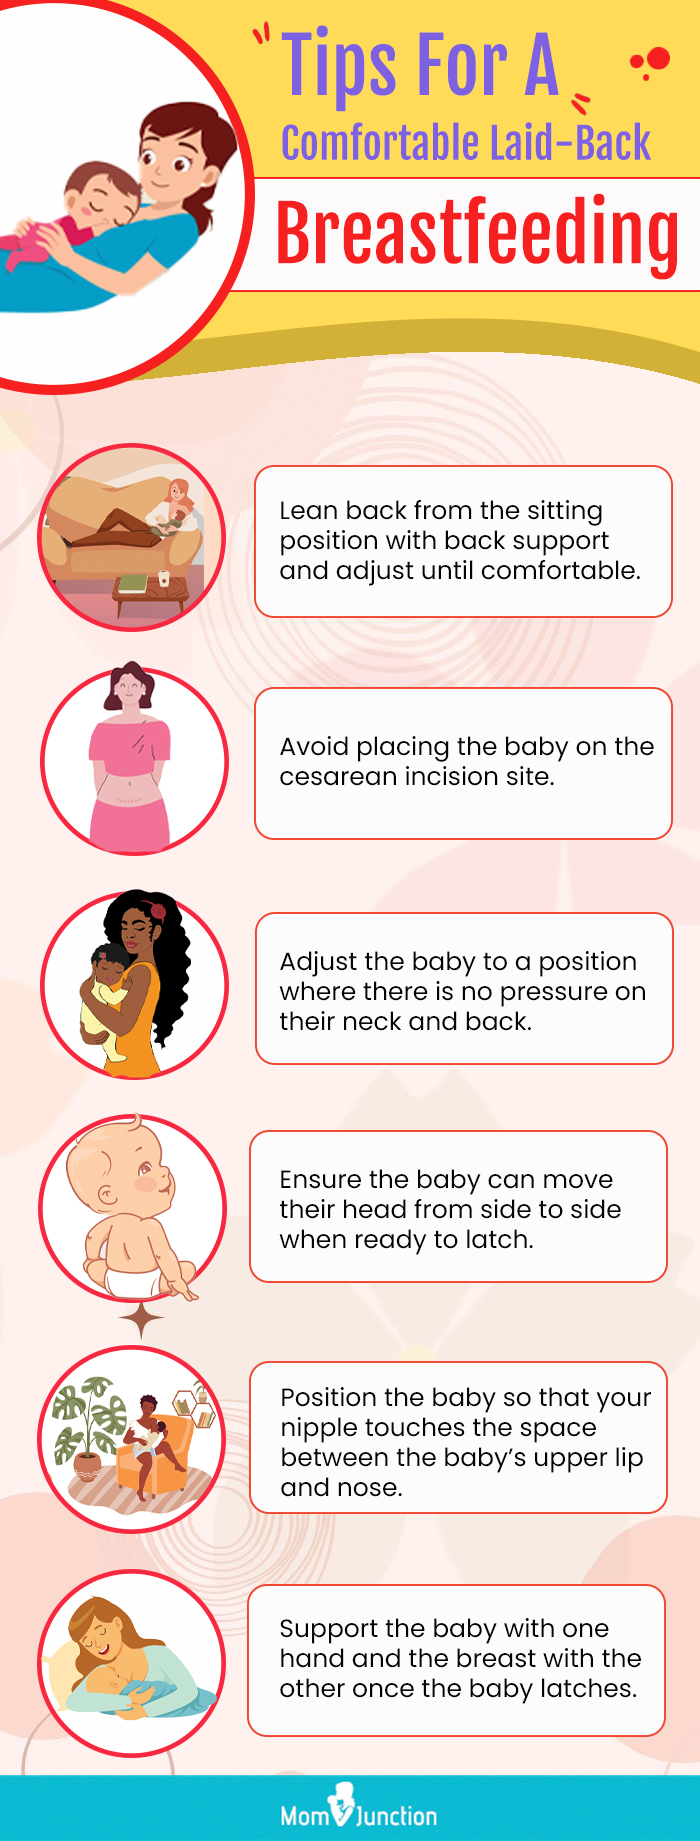 https://www.momjunction.com/wp-content/uploads/2023/06/Tips-For-A-Comfortable-Laid-Back-Breastfeeding.jpg